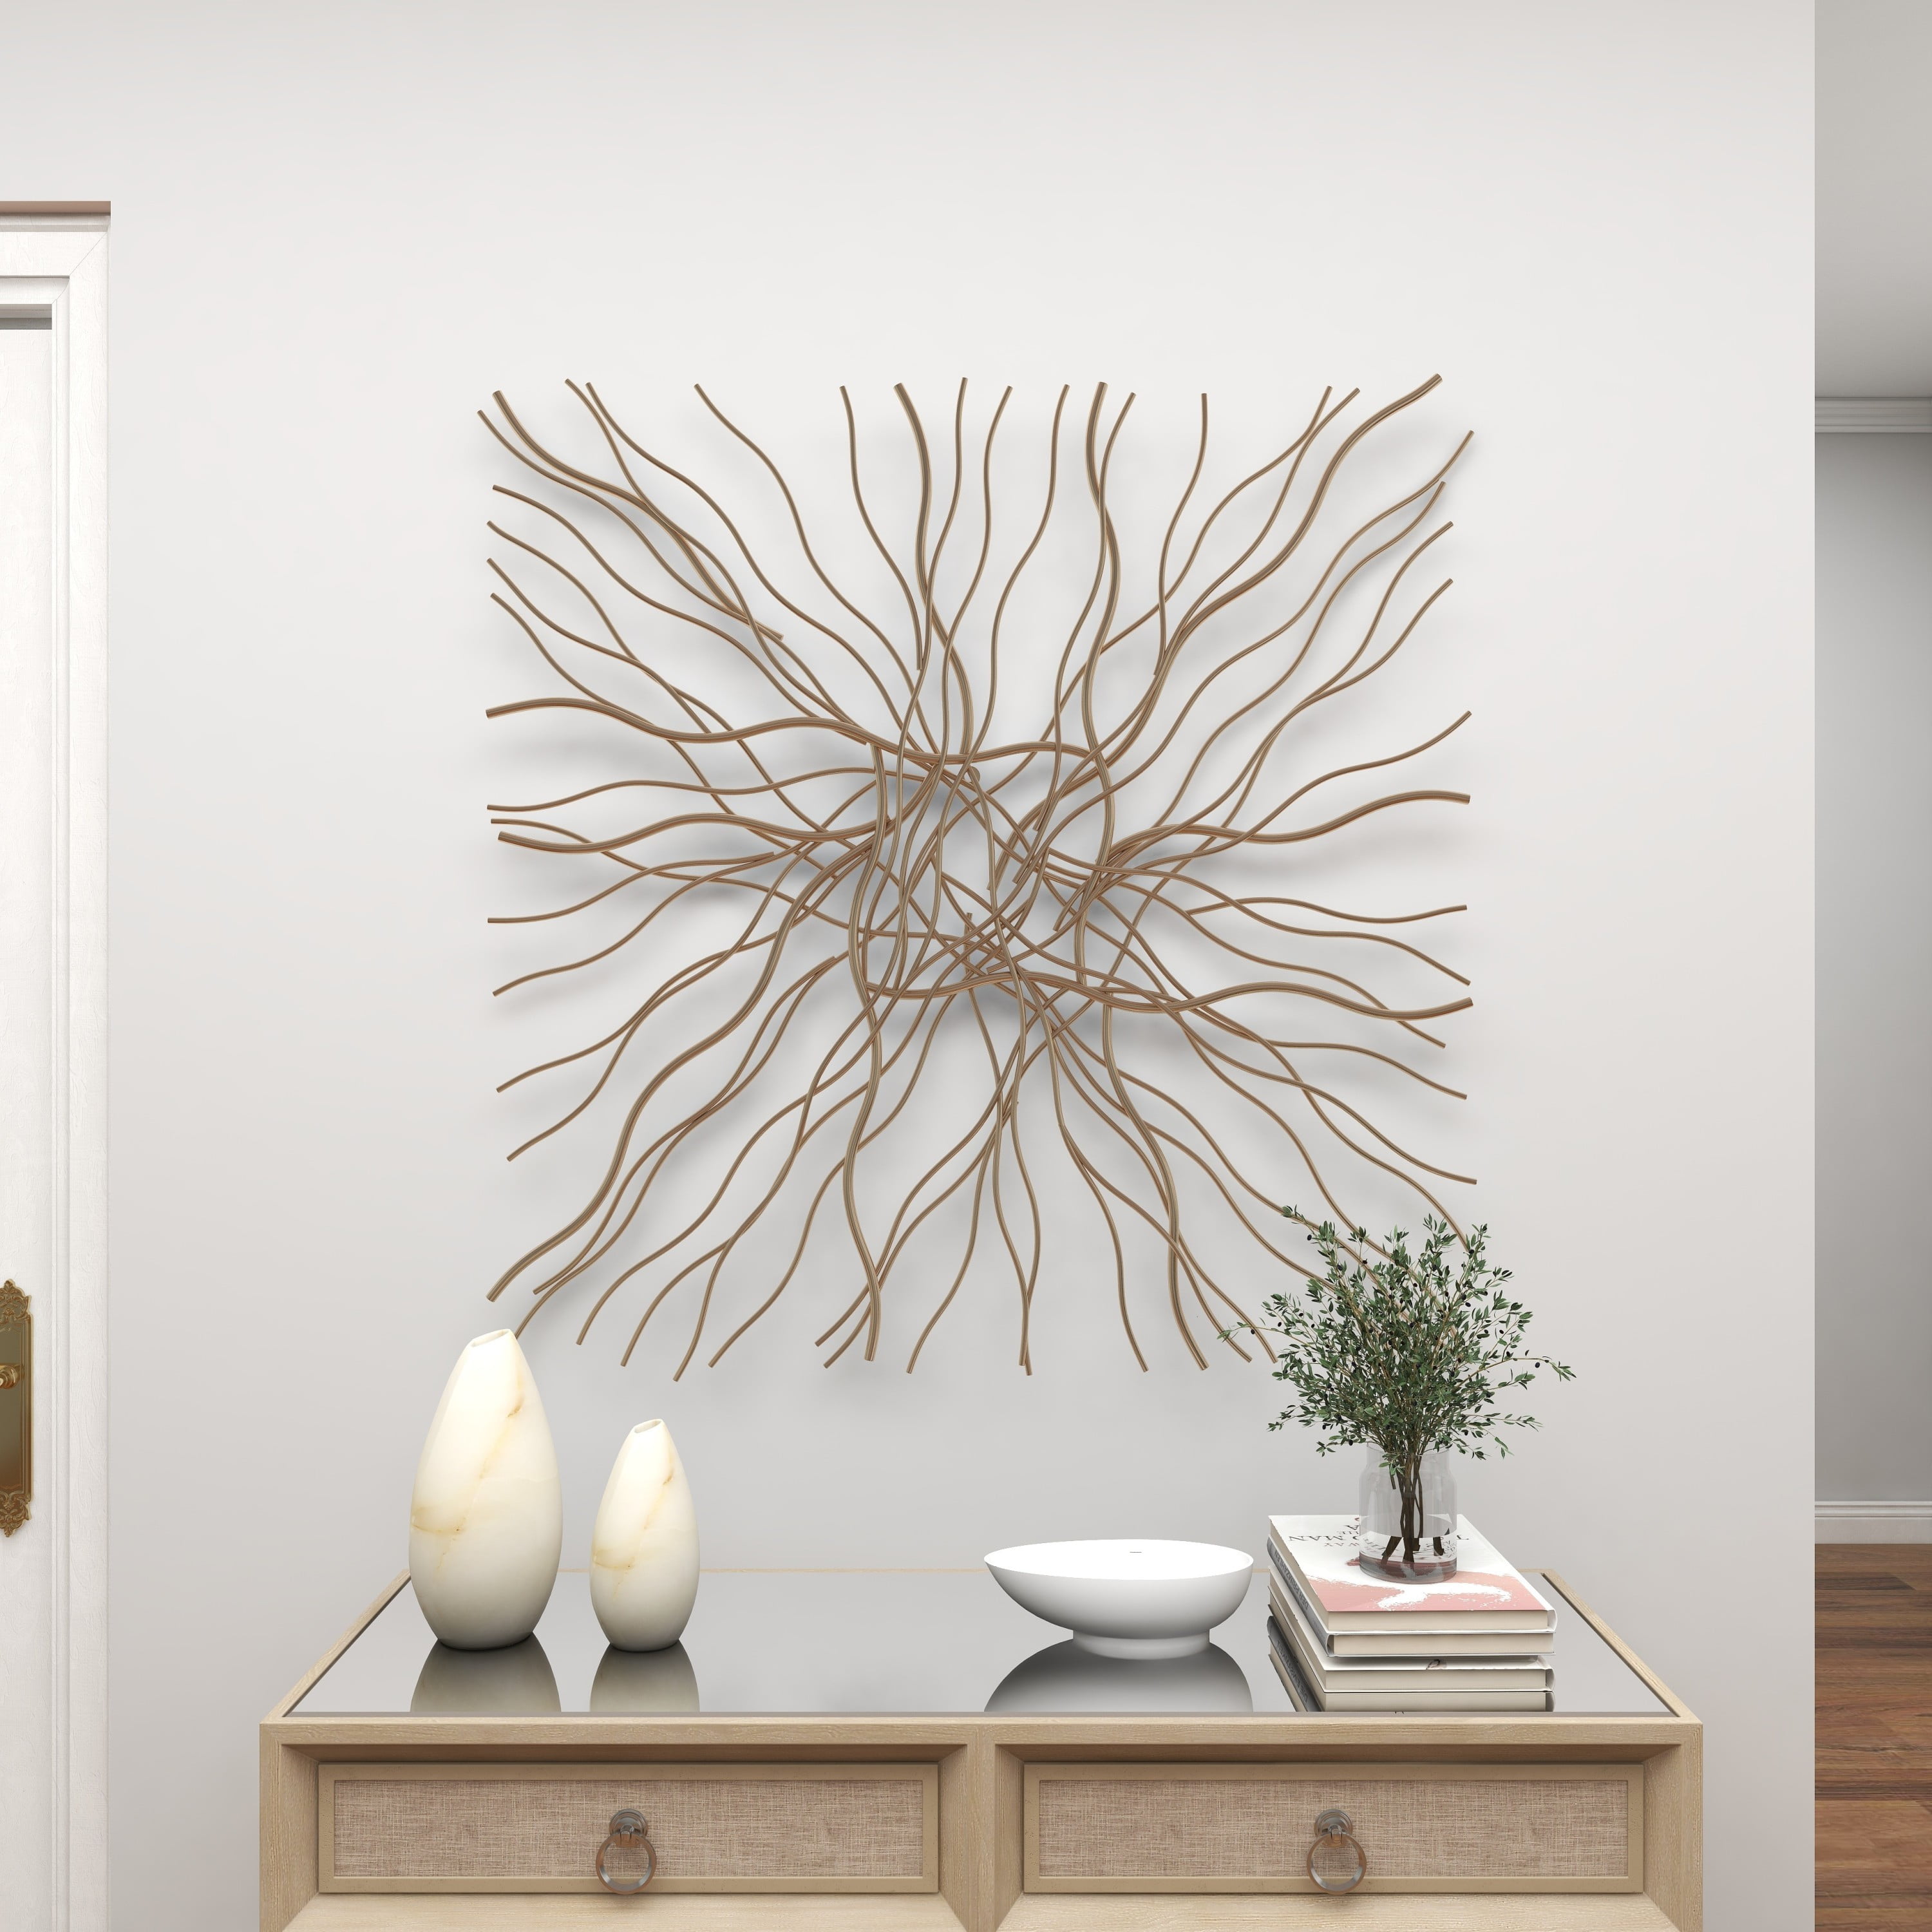 DecMode Gold Metal Overlapping Lines Abstract Wall Decor